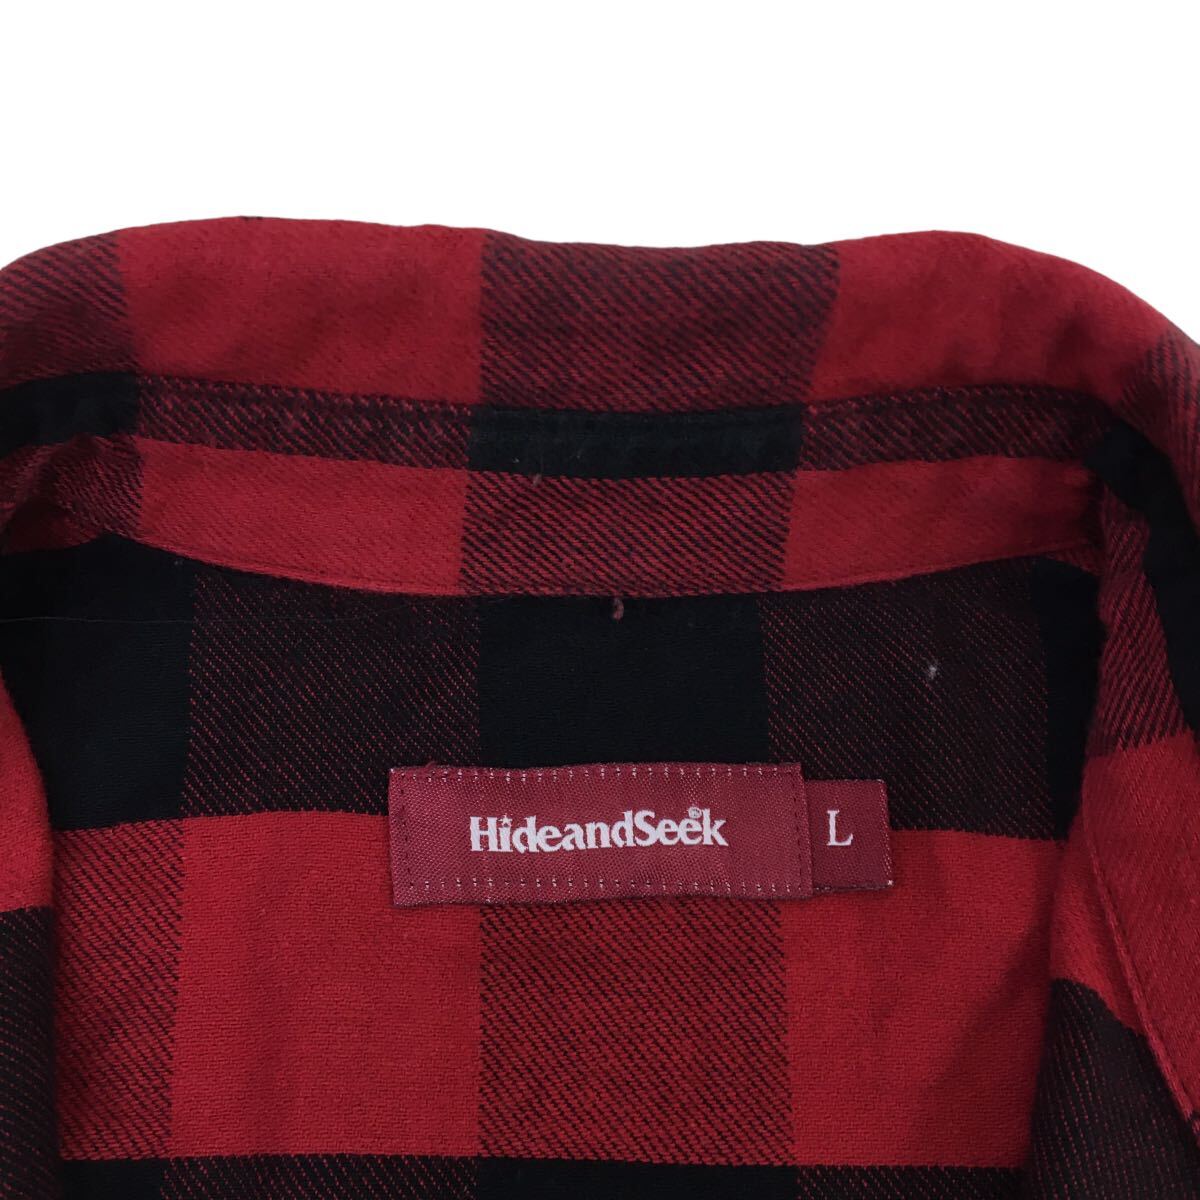 ND175 made in Japan HIDEANDSEEK hyde and si-k long sleeve shirt feather weave tops front button cotton cotton 100% red group total pattern men's L